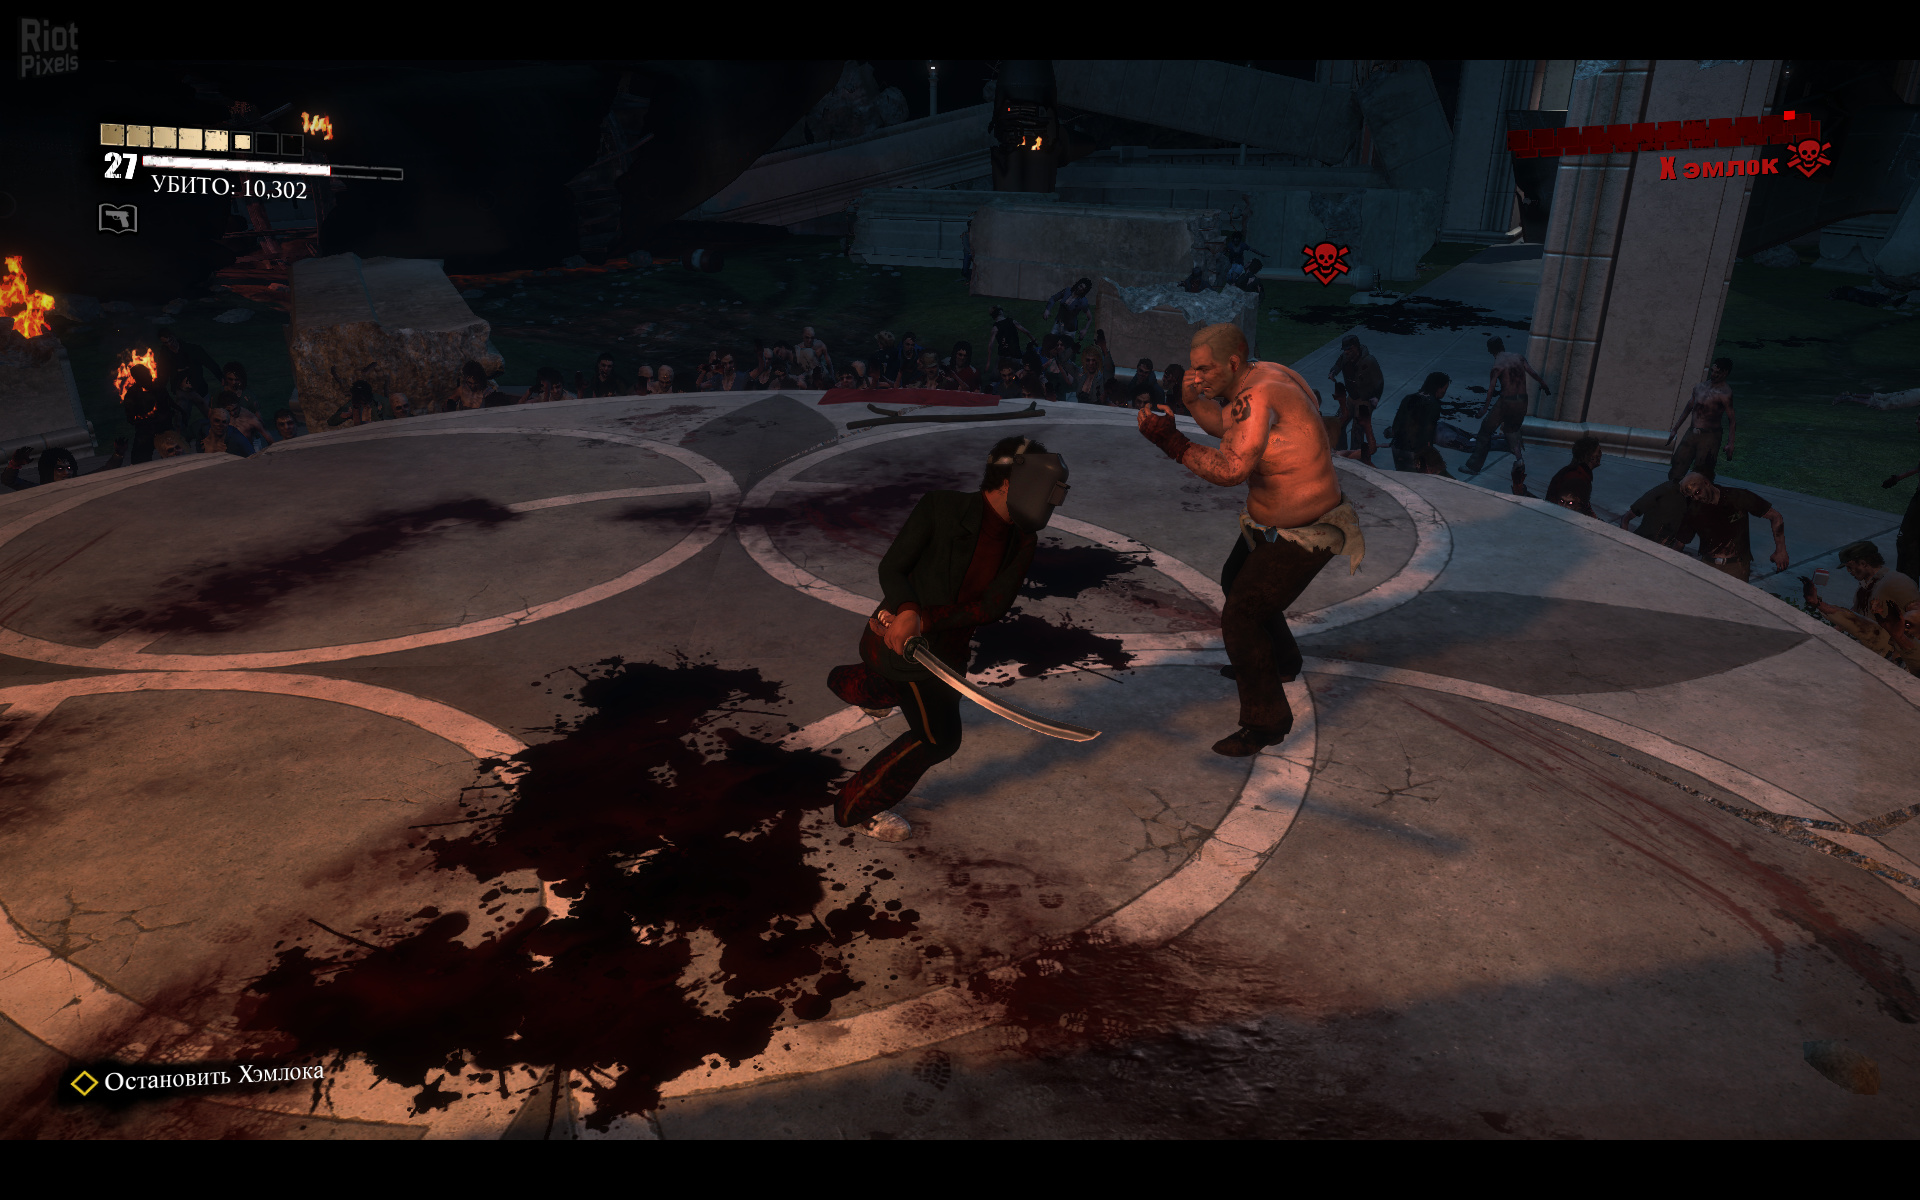 Dead Rising 3: Apocalypse Edition - game screenshots at Riot Pixels, images